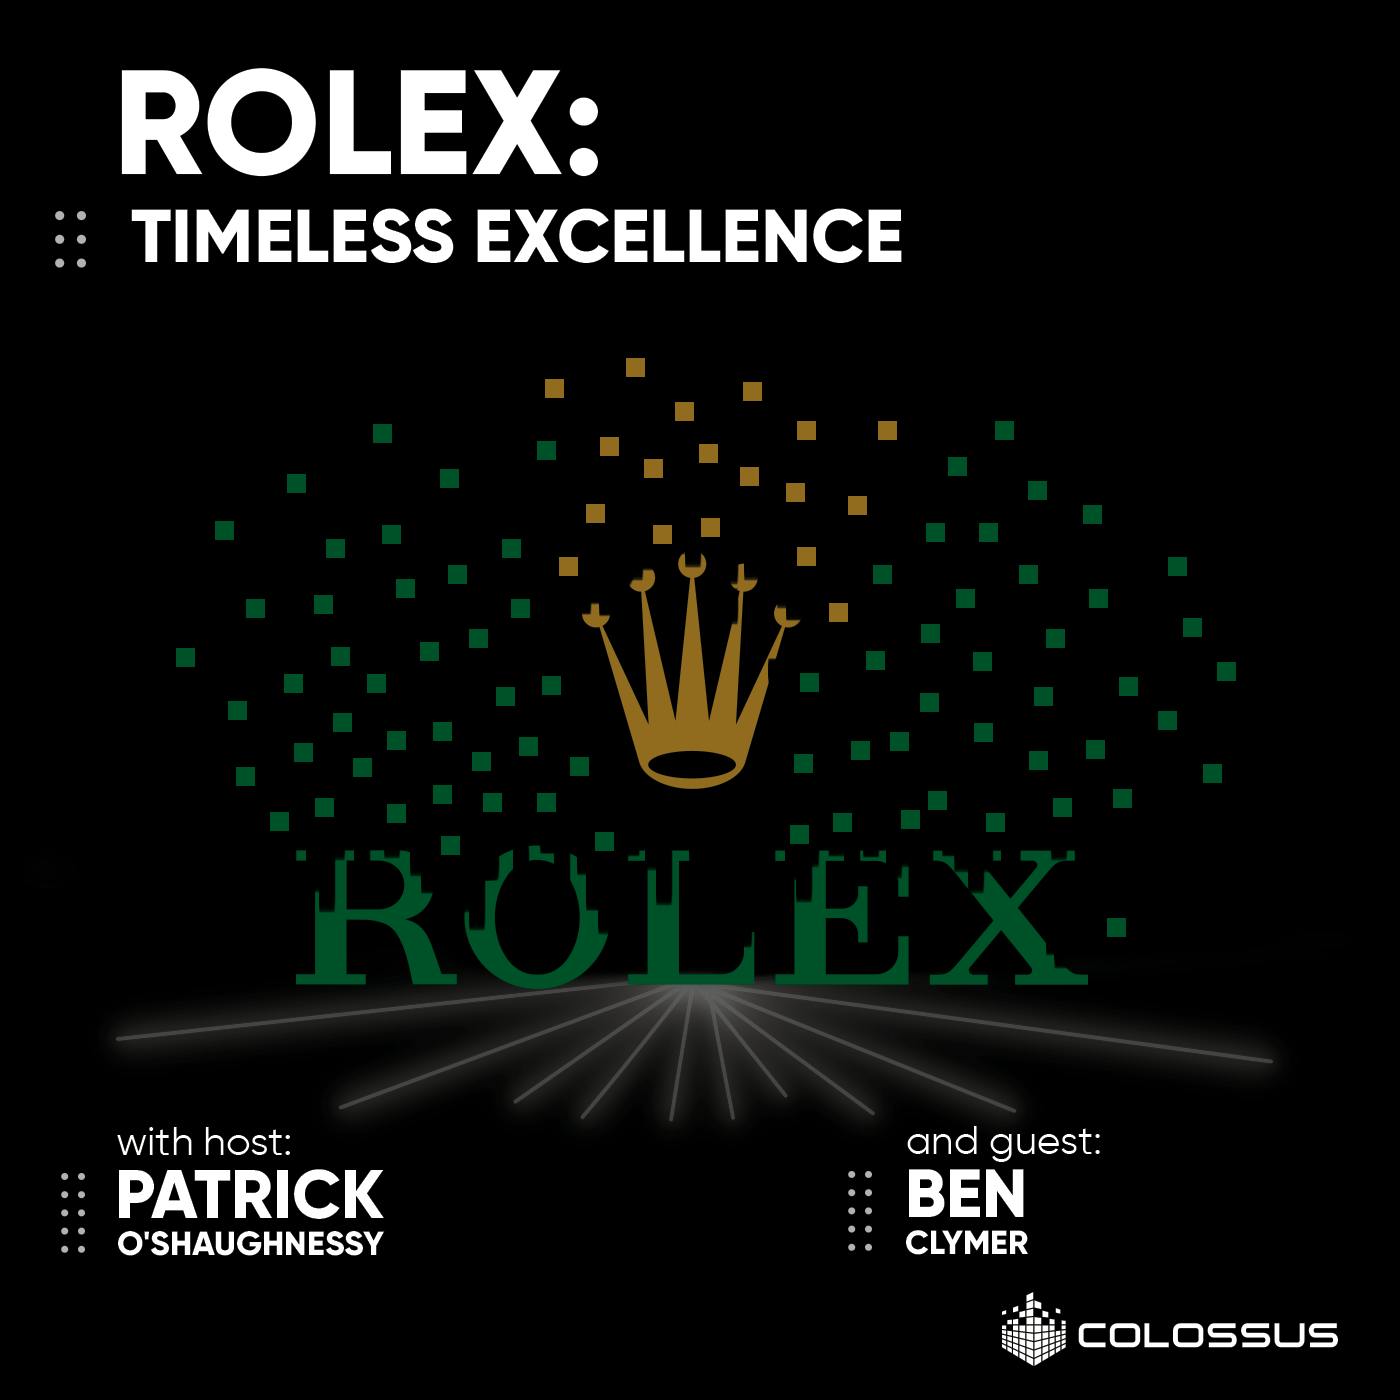 Rolex: Timeless Excellence - [Business Breakdowns, Forever Episode]